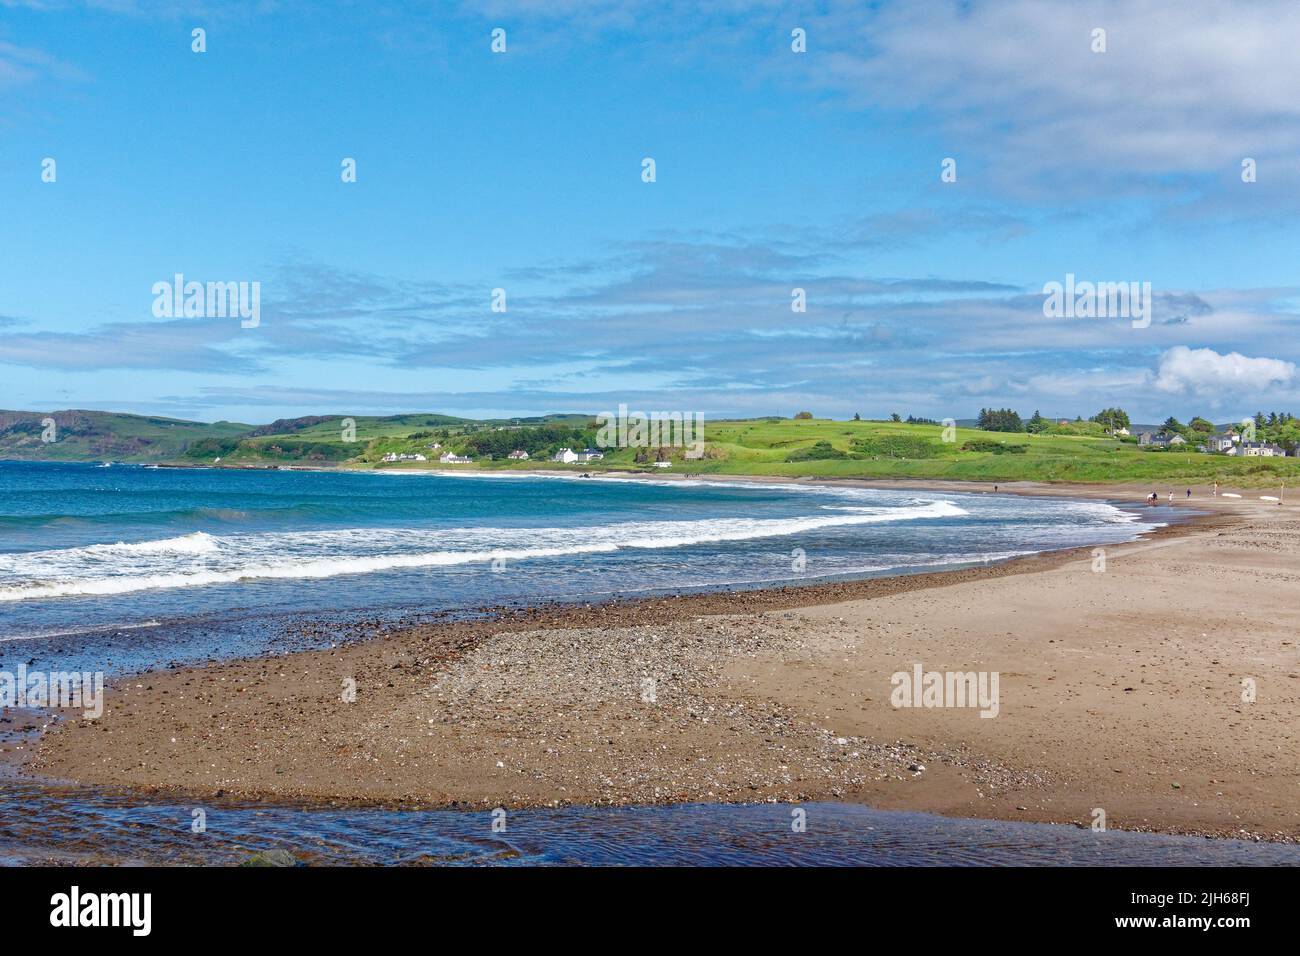 View of the beach at Ballycastle in County Antrim, Northern Ireland Stock Photo